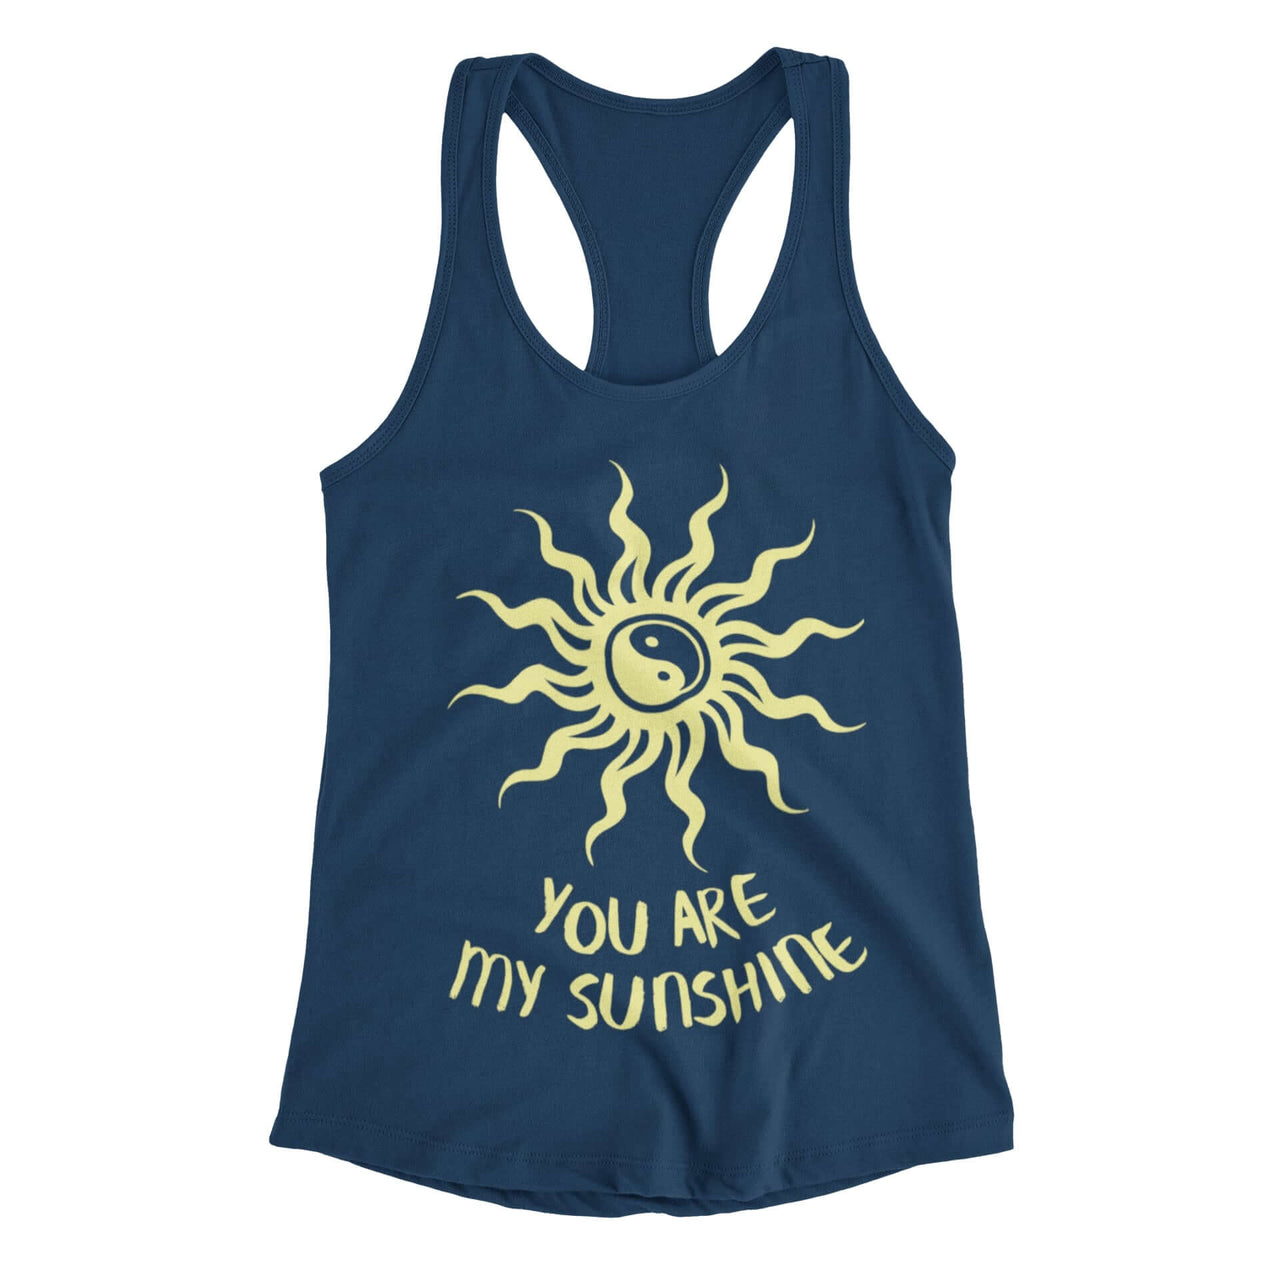 Navy Racerback featuring a Yin Yang sun with bold rays and the text 'You are my sunshine', designed by WooHoo Apparel.